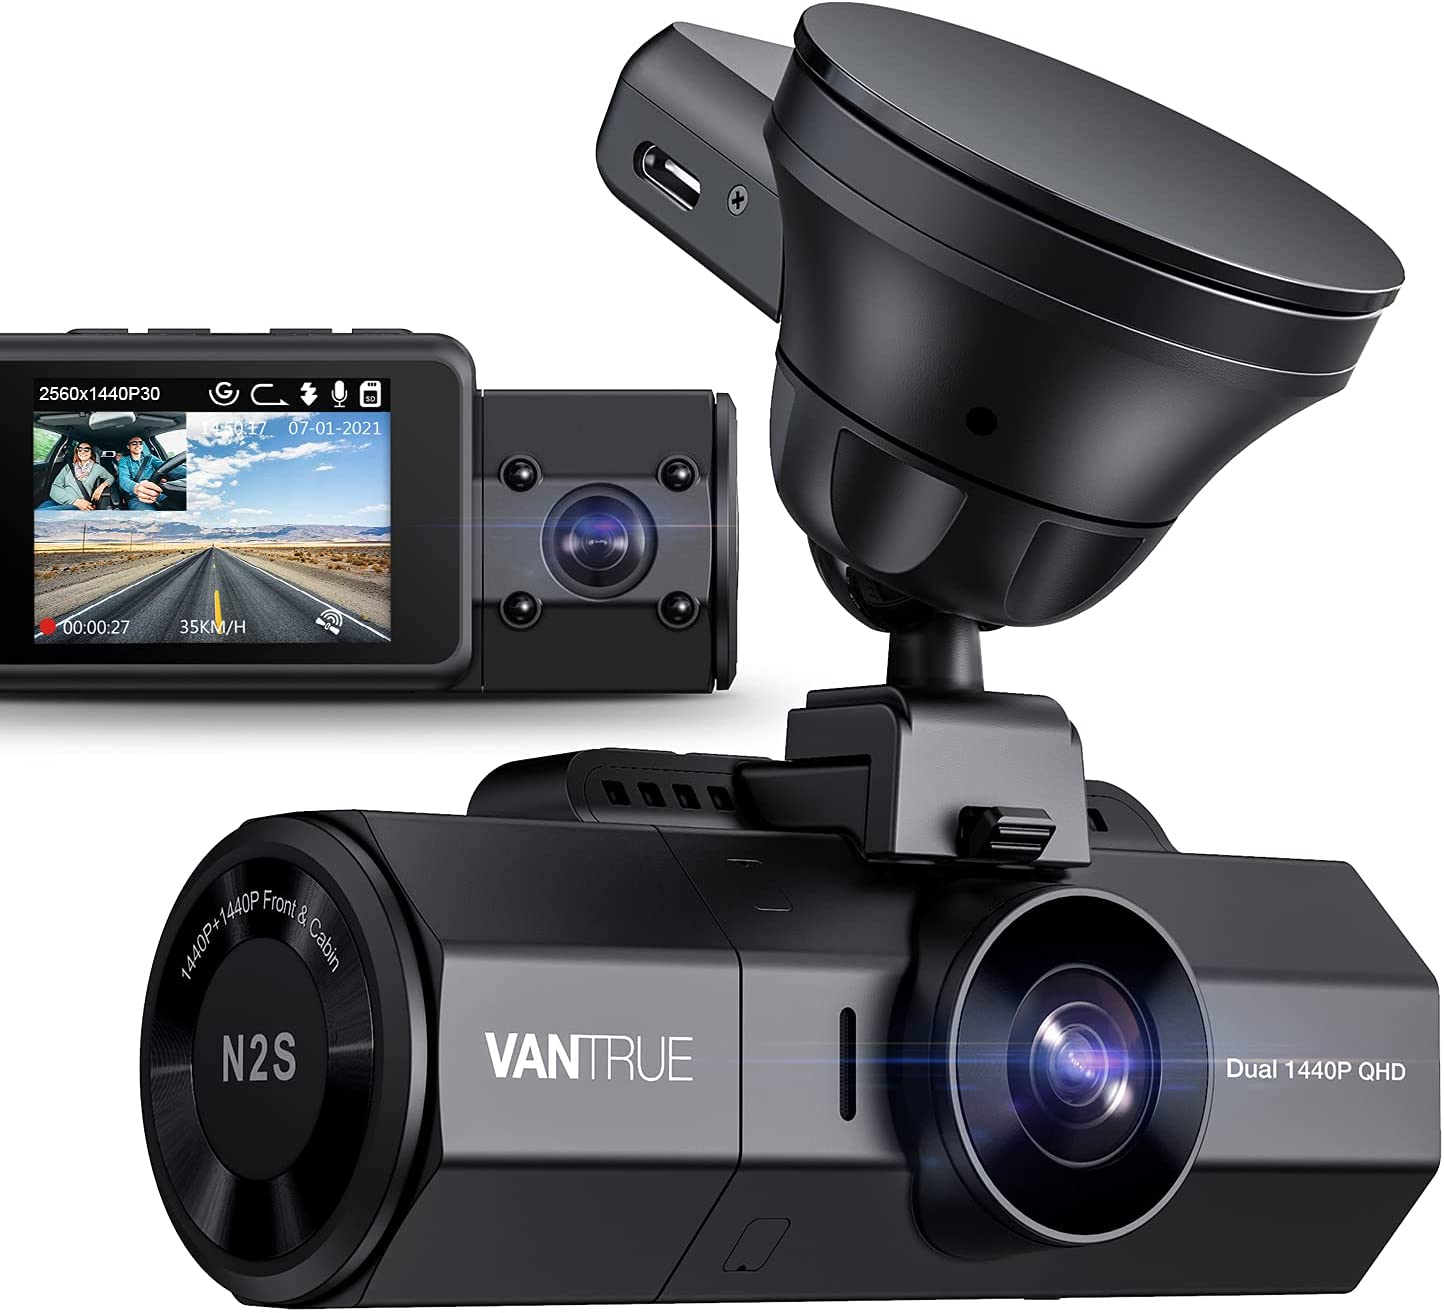 The Vantrue N2S is our choice as #4 of the top five car dashcams for 2021.